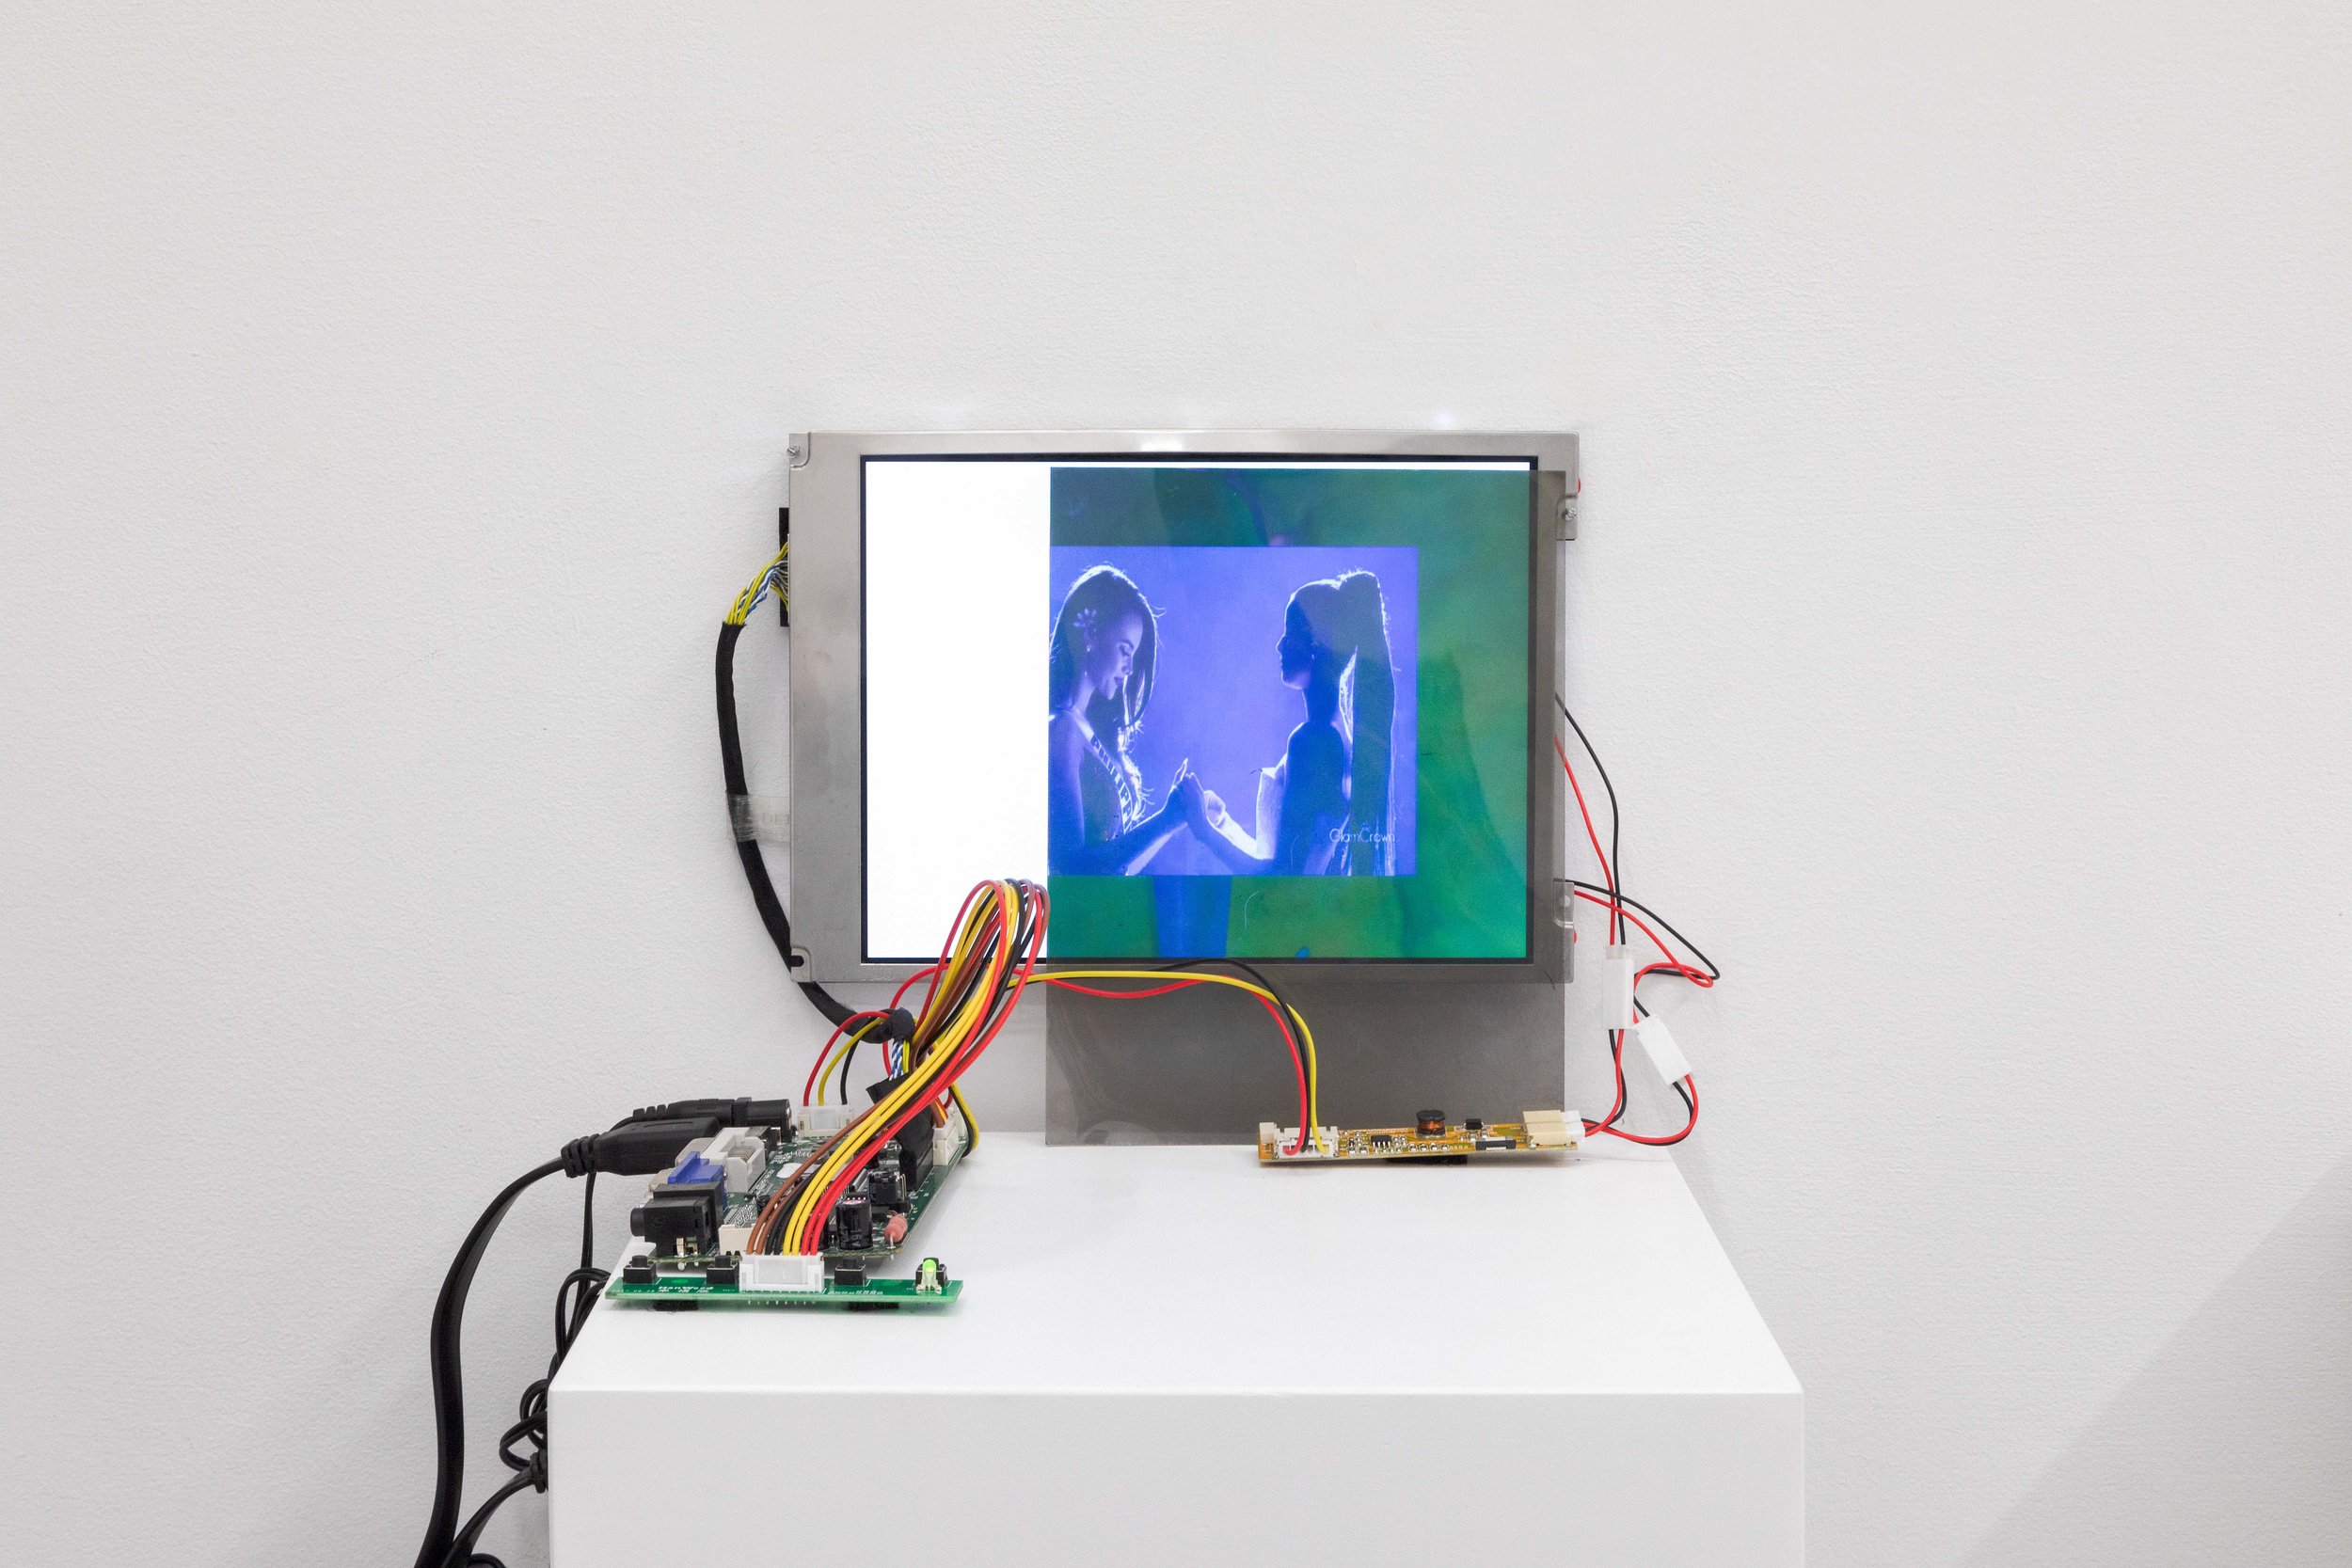  Eileen Isagon Skyers,  Songwriter , 2019, Video installation with opaque two white screens, translucent polarized lens filters and floating shelves, Dimensions variable  